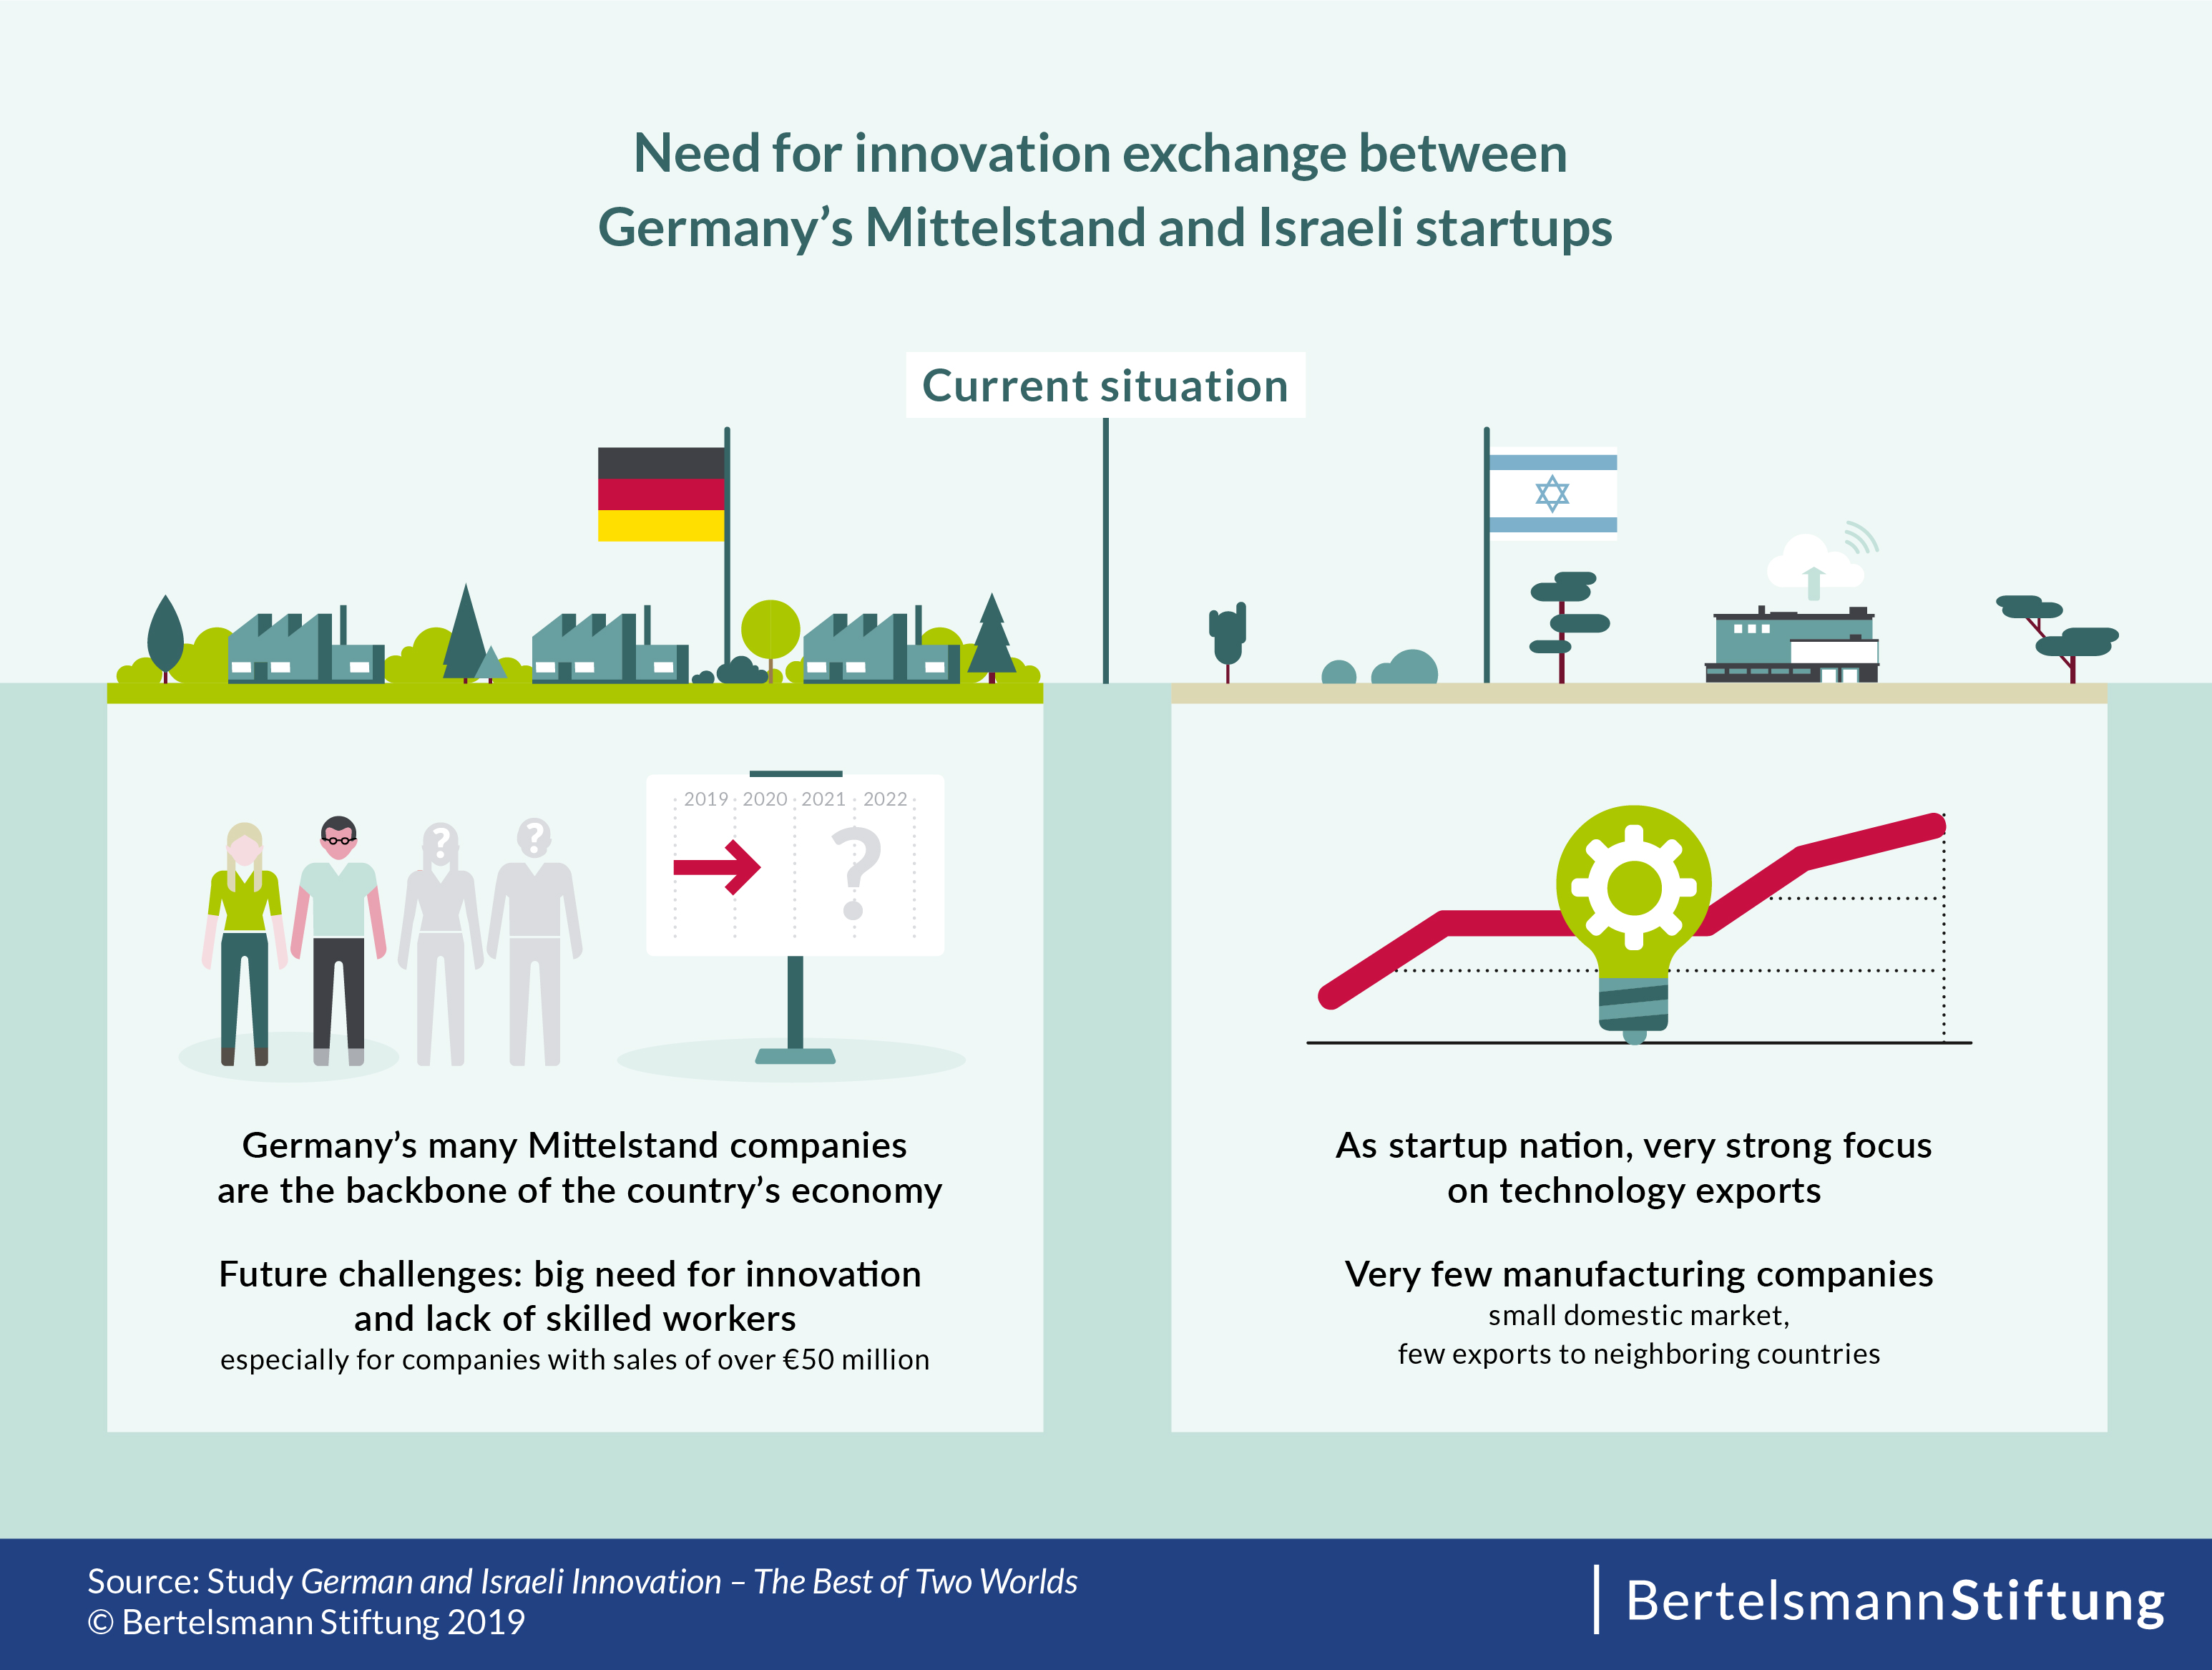 Connecting Germany's Mittelstand and Israeli startups - need